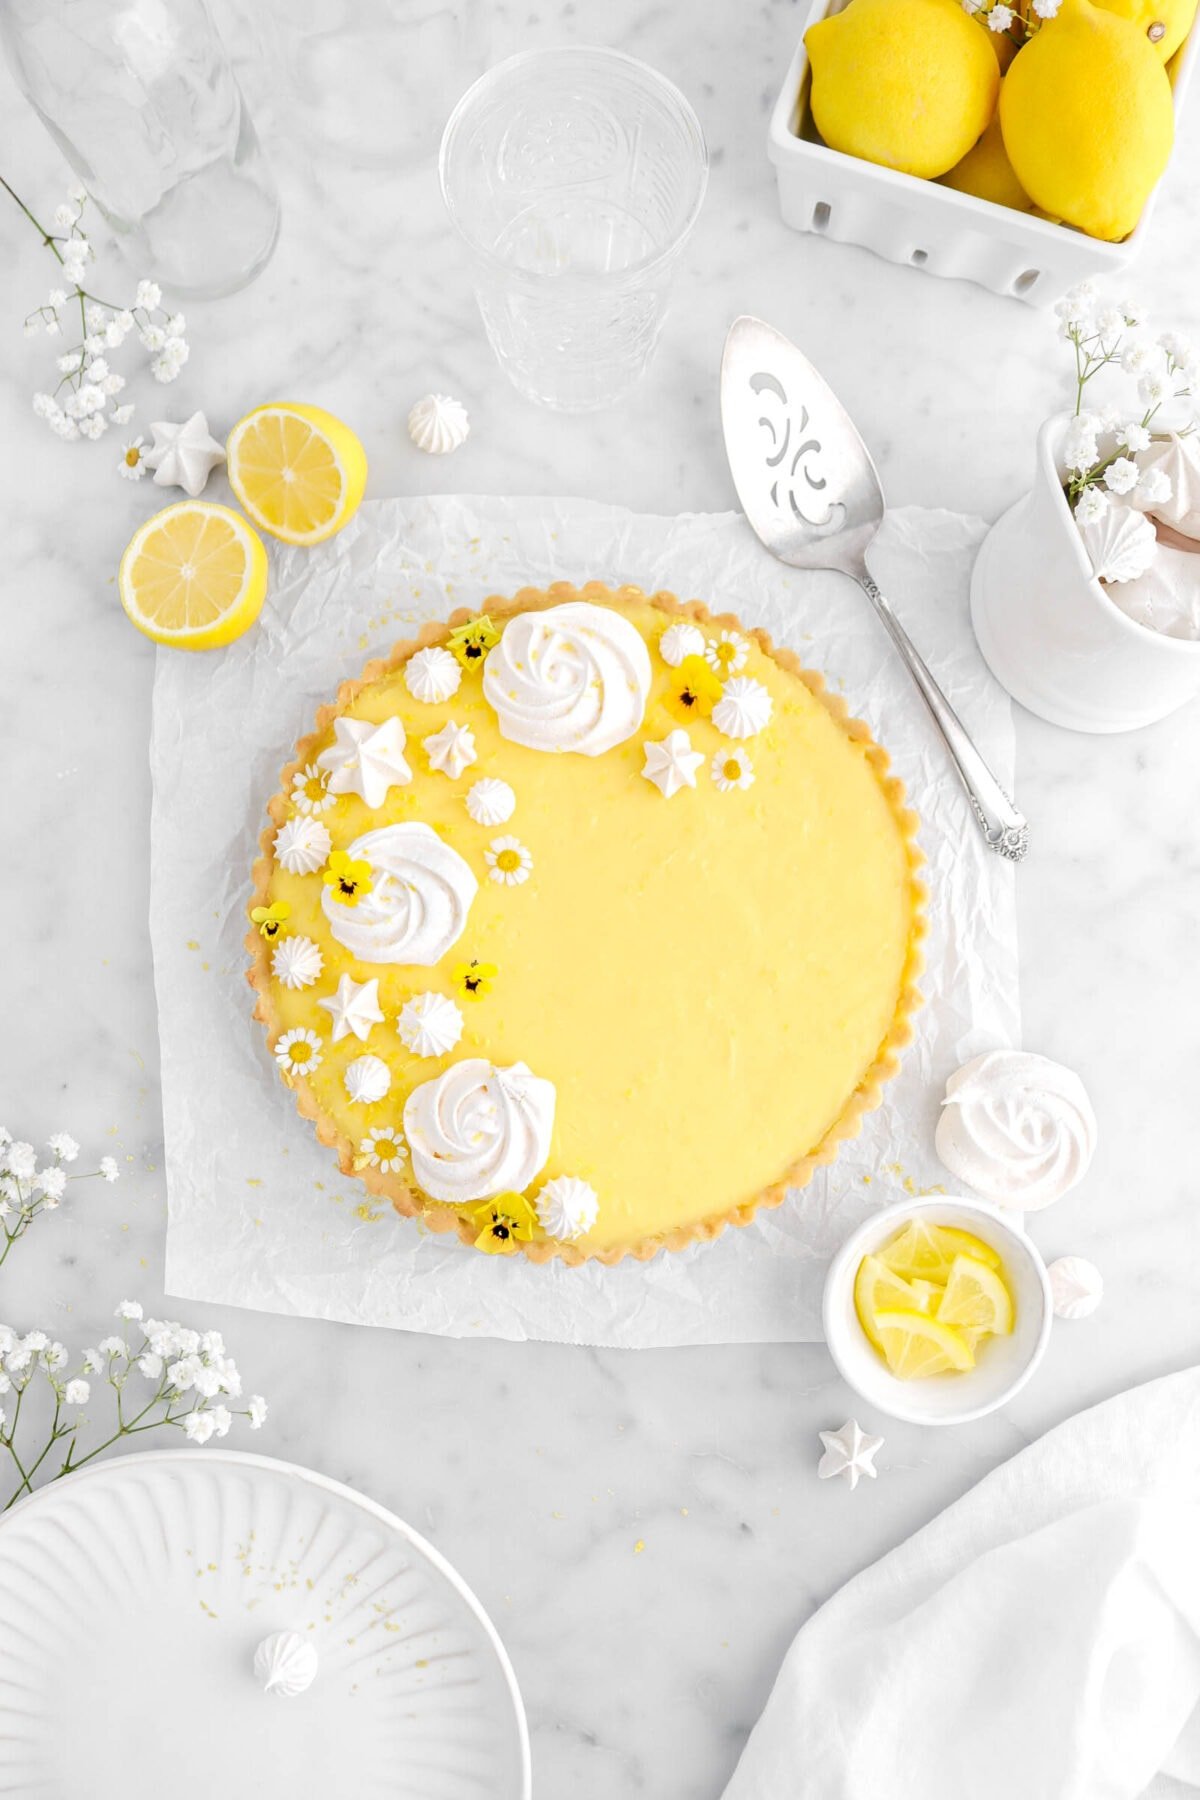 pulled back overhead shot of lemon tart on square piece of parchment on marble surface with meringue cookies and flowers on top of of tart, with lemons, lemon slices, white flowers, and white plate around.